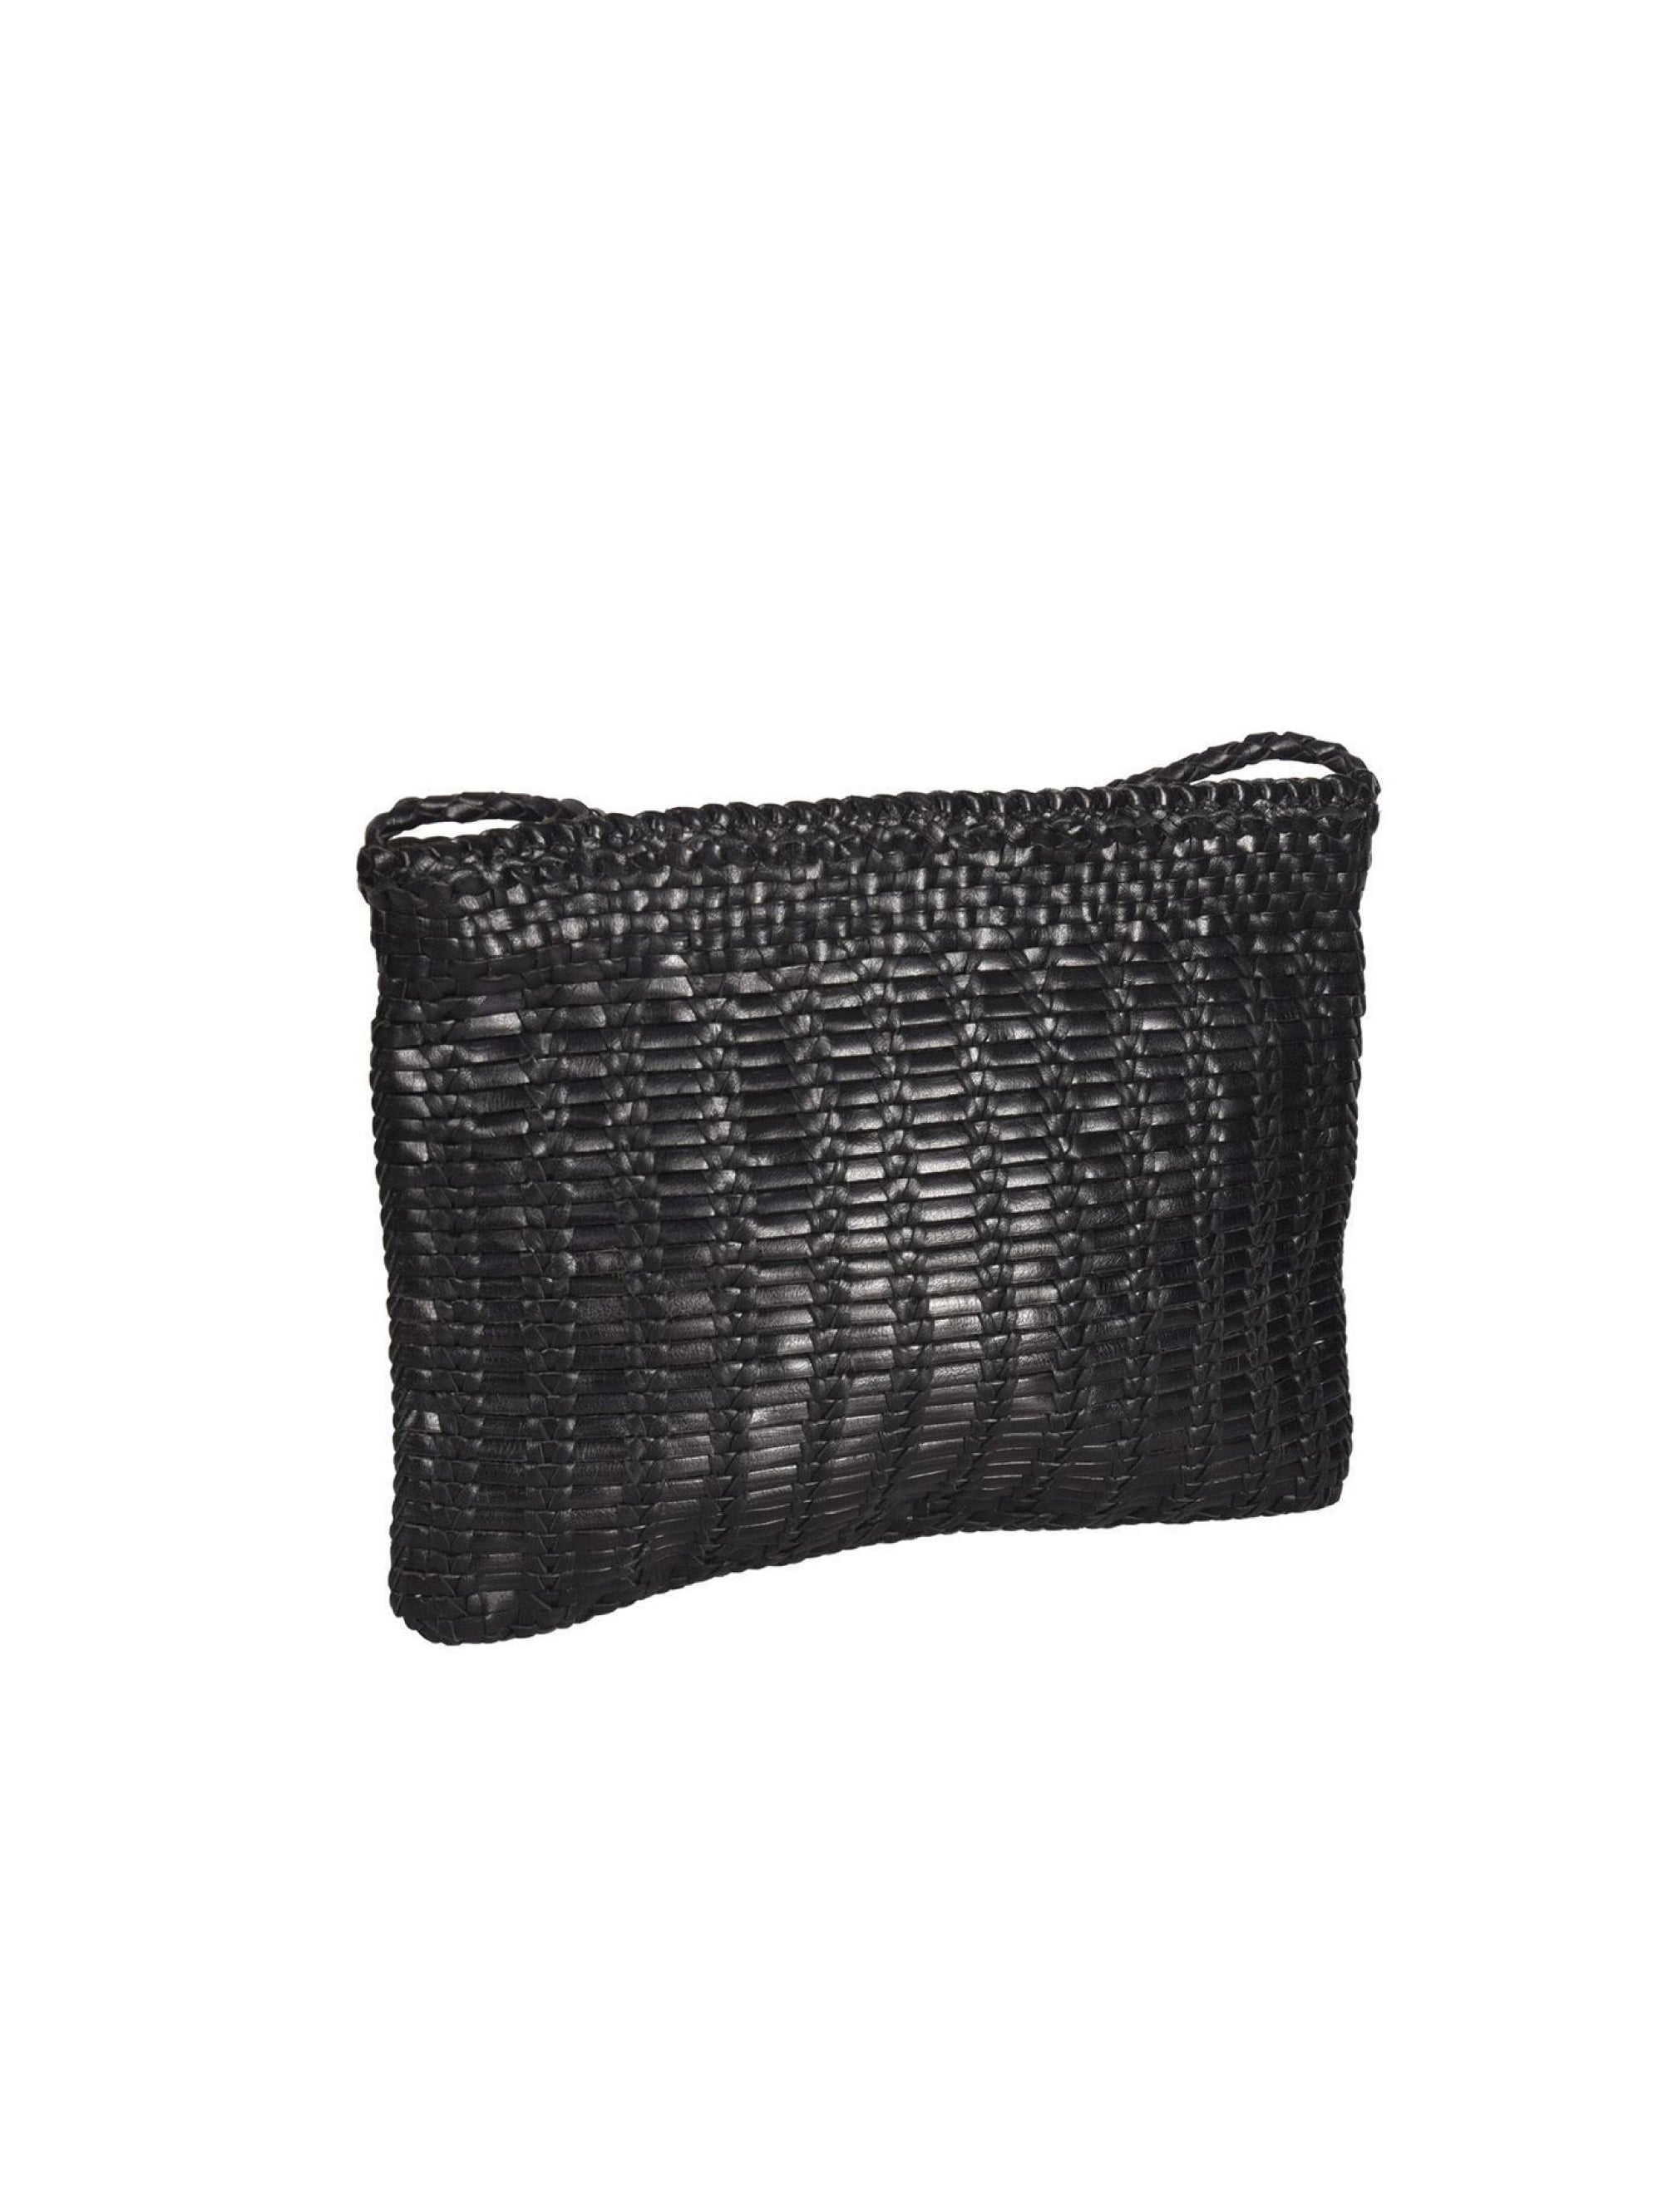 Bali Large Black Woven Leather Clutch